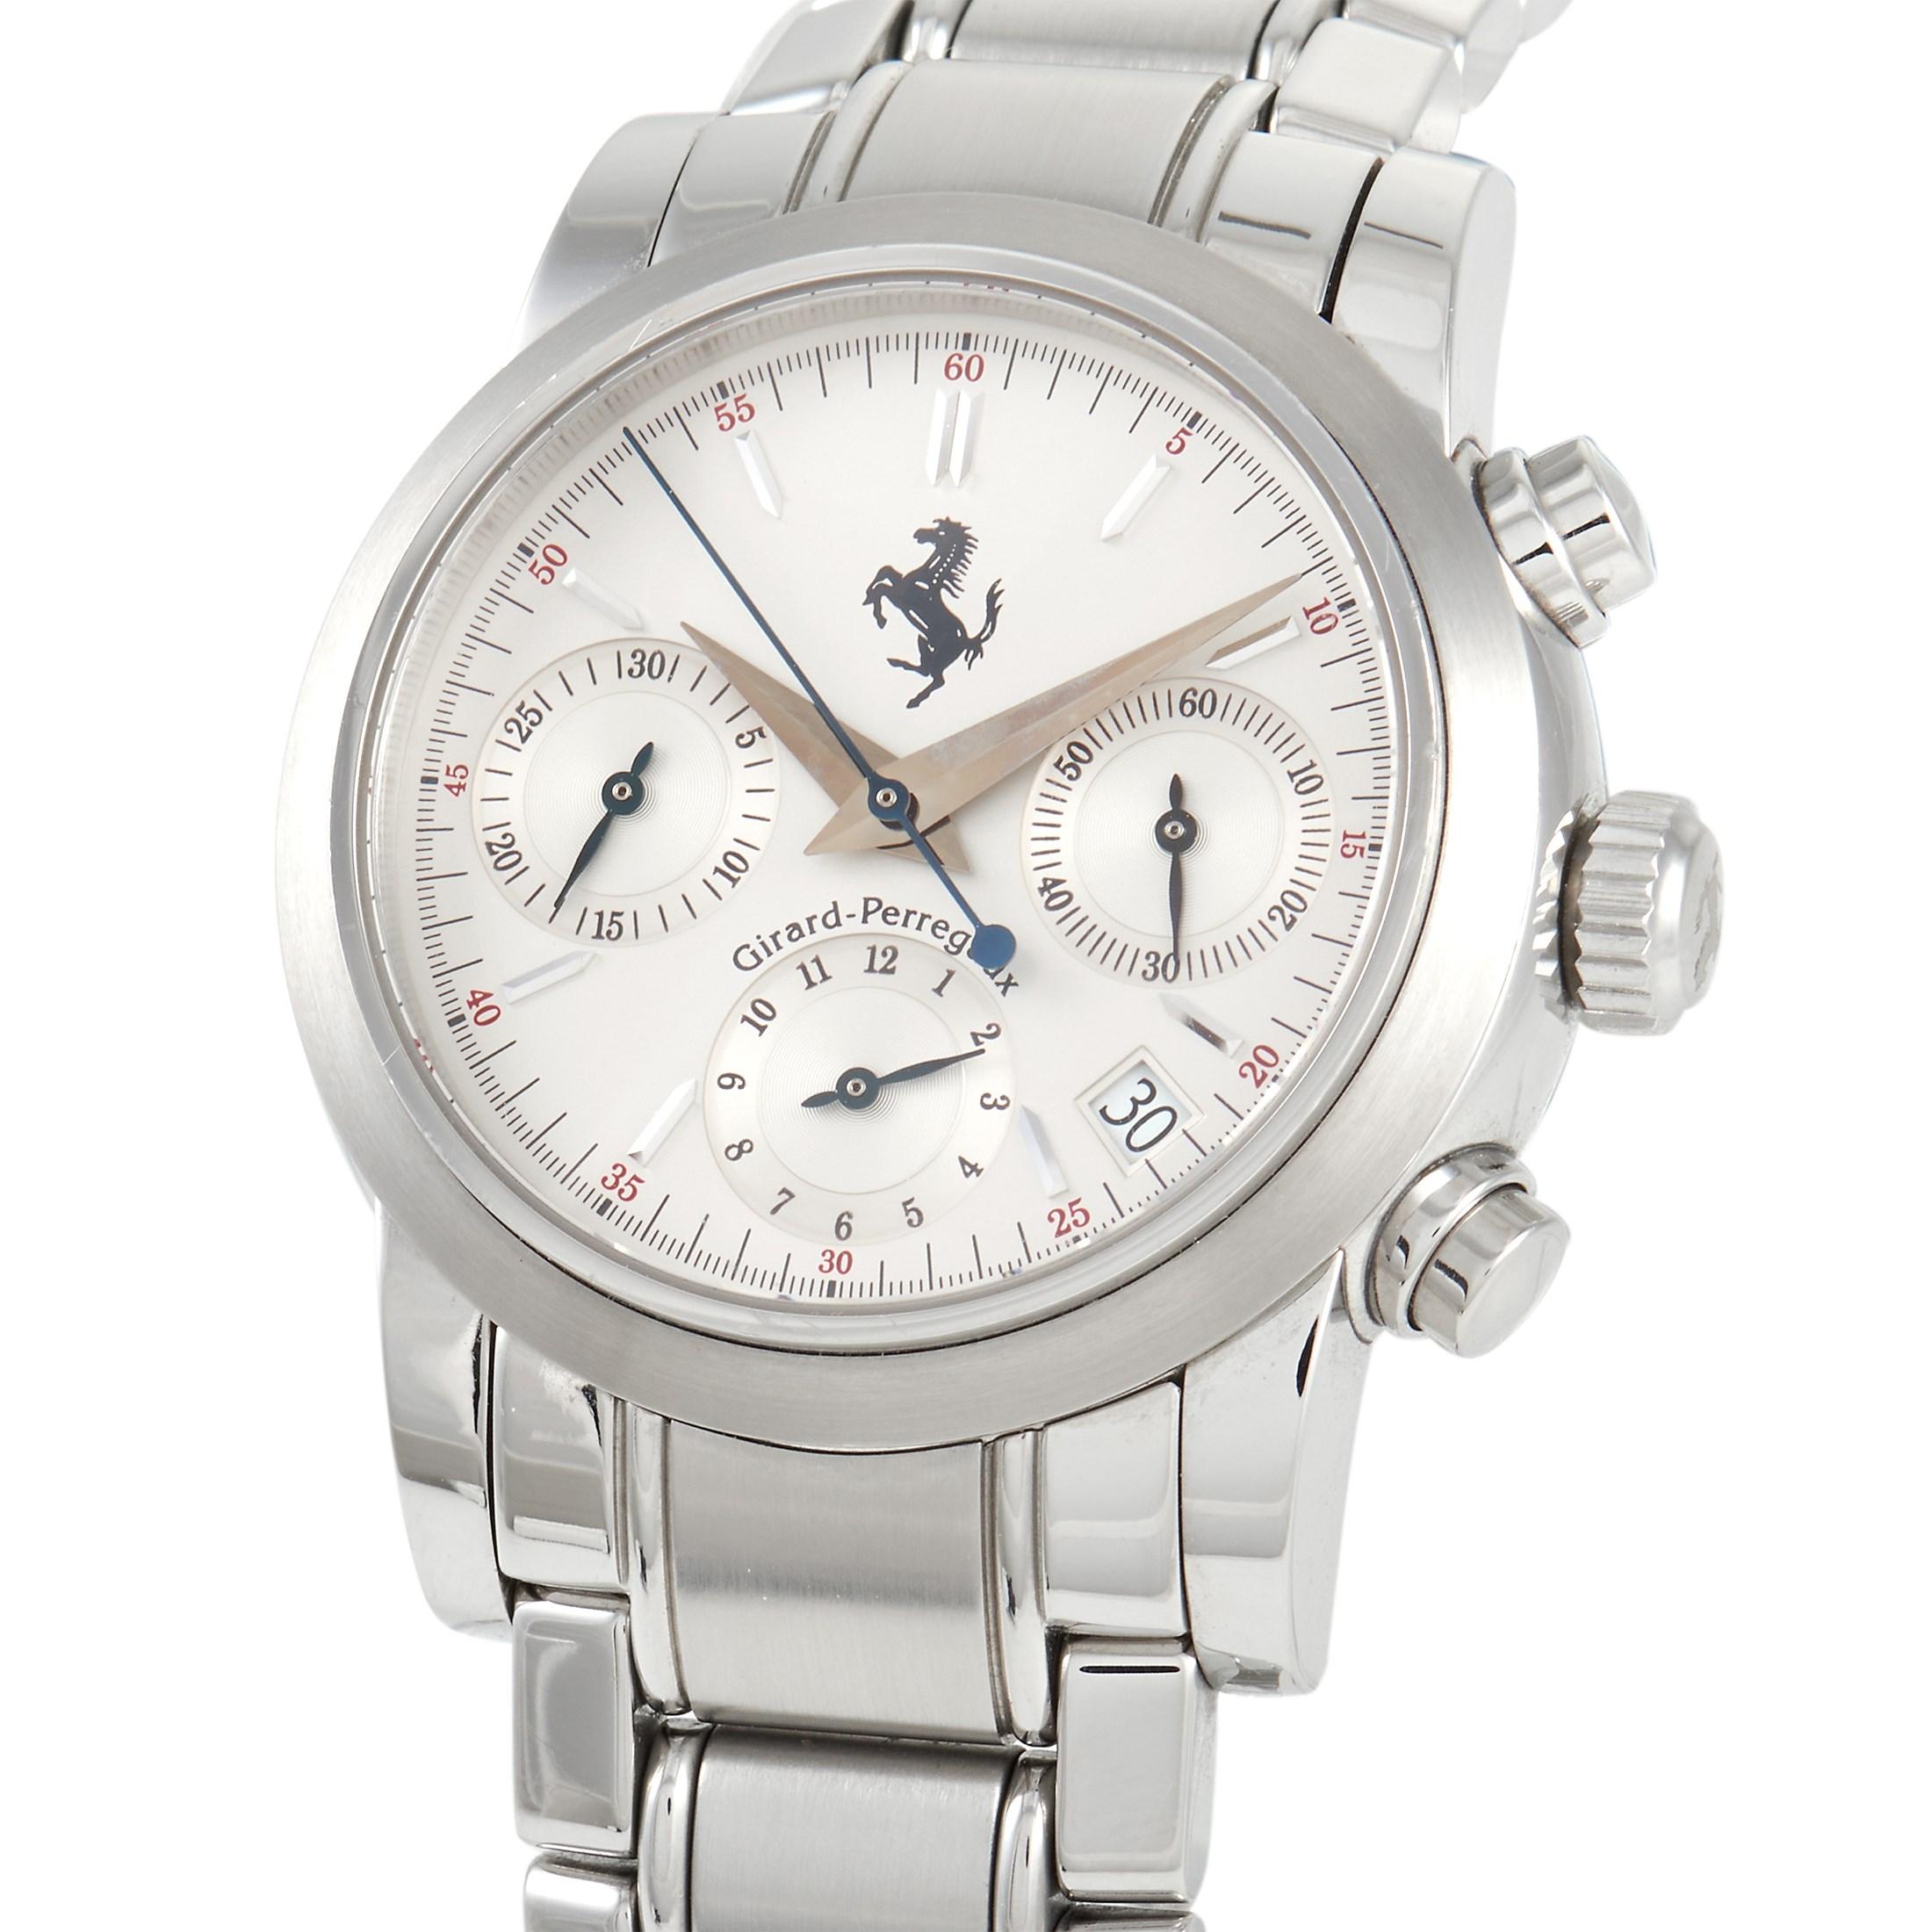 The Girard Perregaux Ferrari Chronograph Men's Watch 8020 is designed with a 38mm stainless steel case that is about 13mm thick. It has a complementing silver-tone stainless steel bracelet with hidden clasp. The watch has a silvery-white dial with